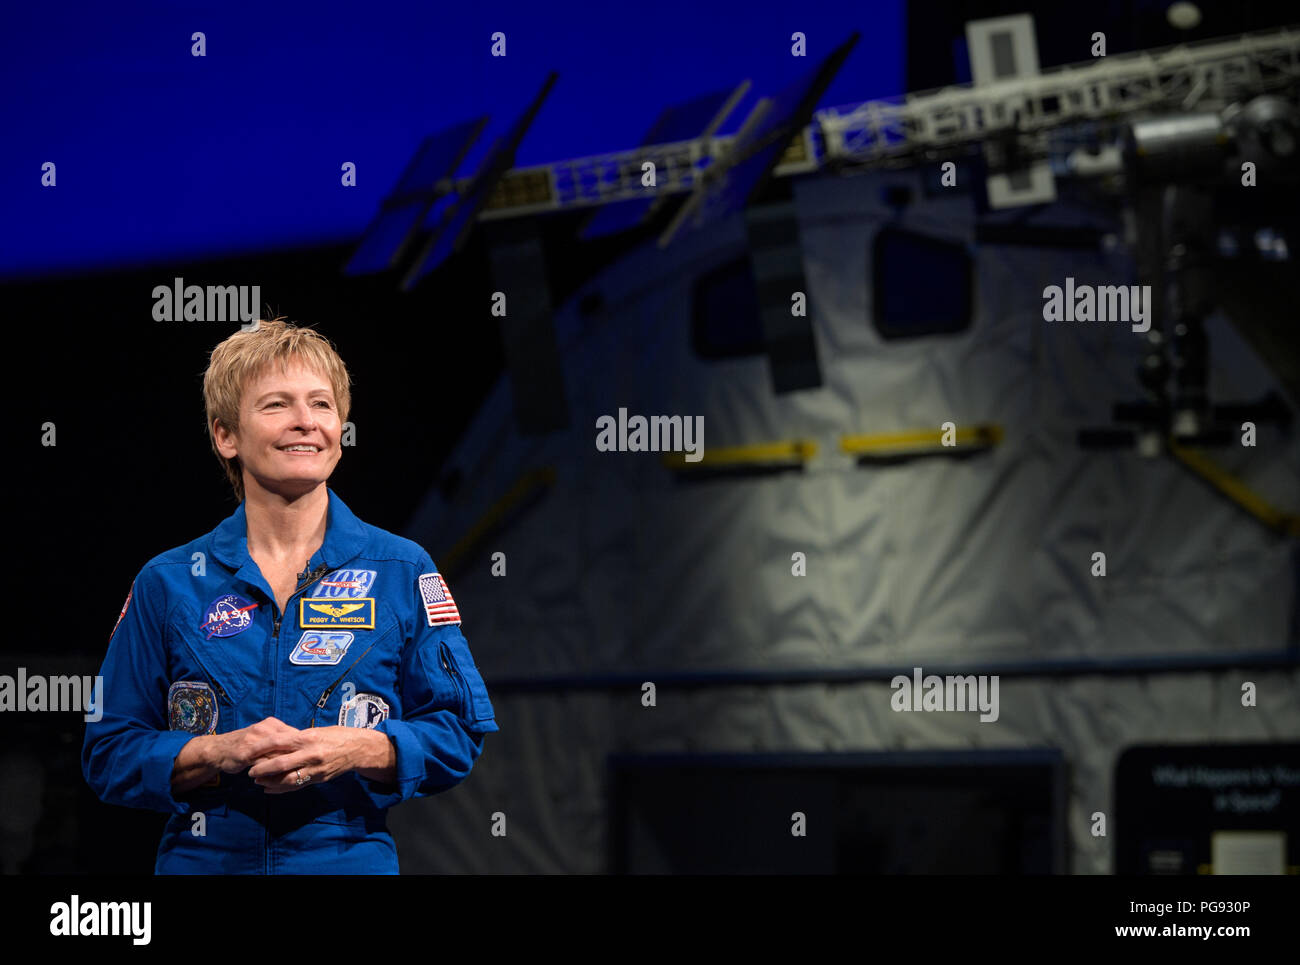 NASA astronaut Peggy Whitson is seen during an interview, Friday, March 2, 2018 at the Smithsonian's National Air and Space Museum in Washington. Whitson spent 288 days onboard the International Space Station as a member of Expedition 50, 51, and 52, conducting four spacewalks and contributing to hundreds of experiments in biology, biotechnology, physical science and Earth science during her stay. Stock Photo